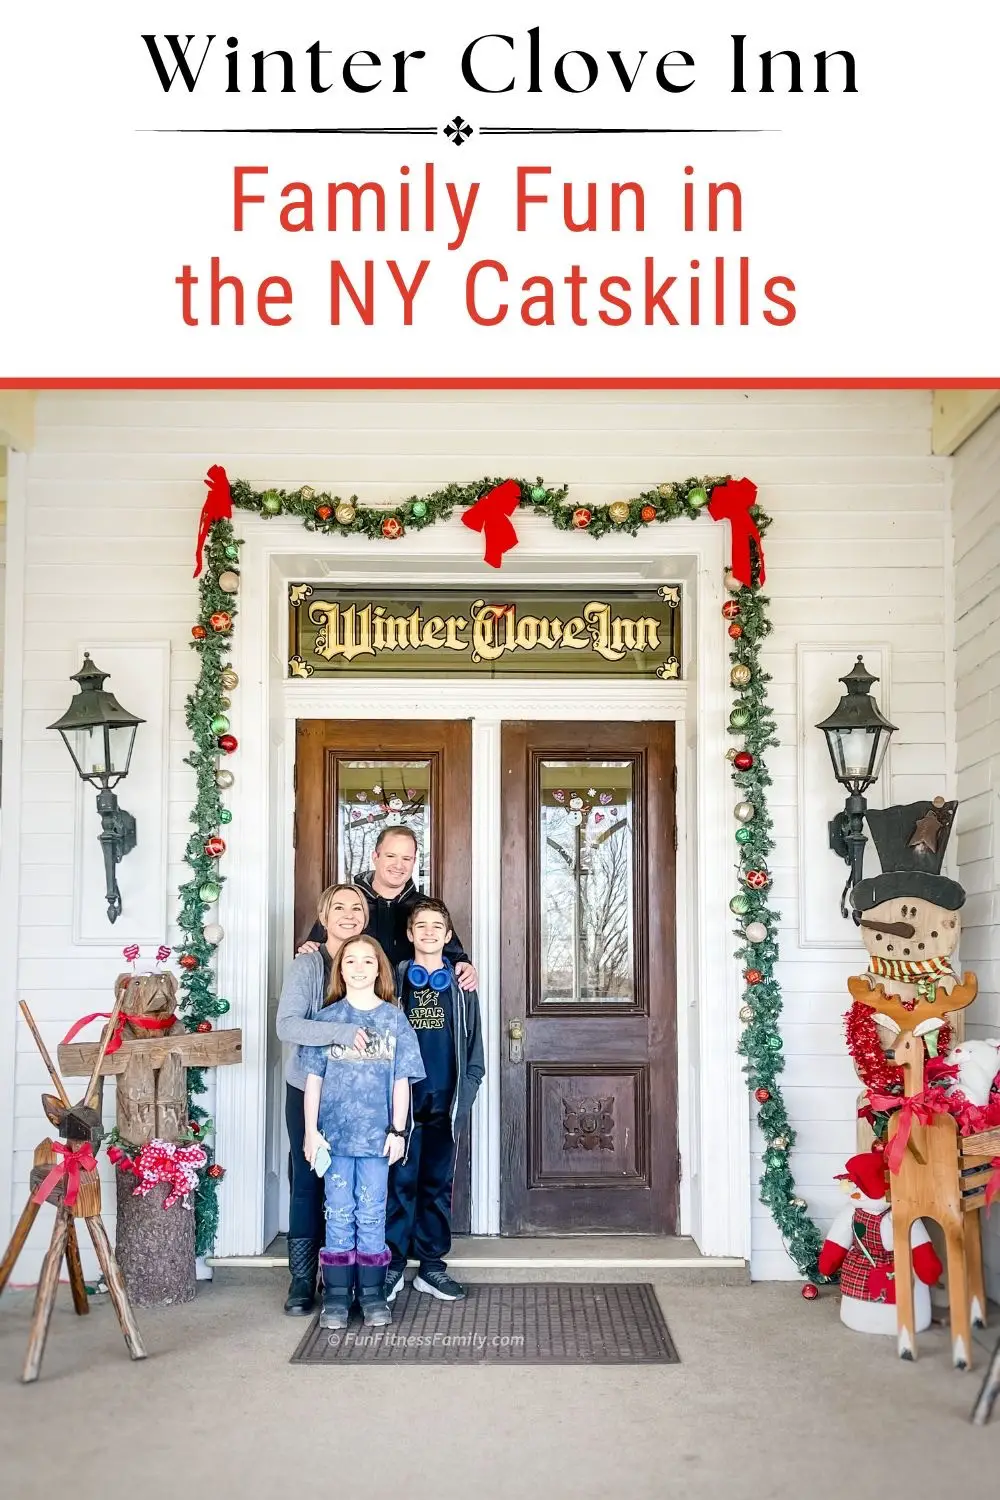 The White Clove Inn is an all-inclusive family resort in the Catskills region of upstate New York. It is the perfect place for a weekend getaway or home base for exploring neighboring towns and villages in the Catskill Mountain region. #newyork #catskills #allinclusive #familytravel